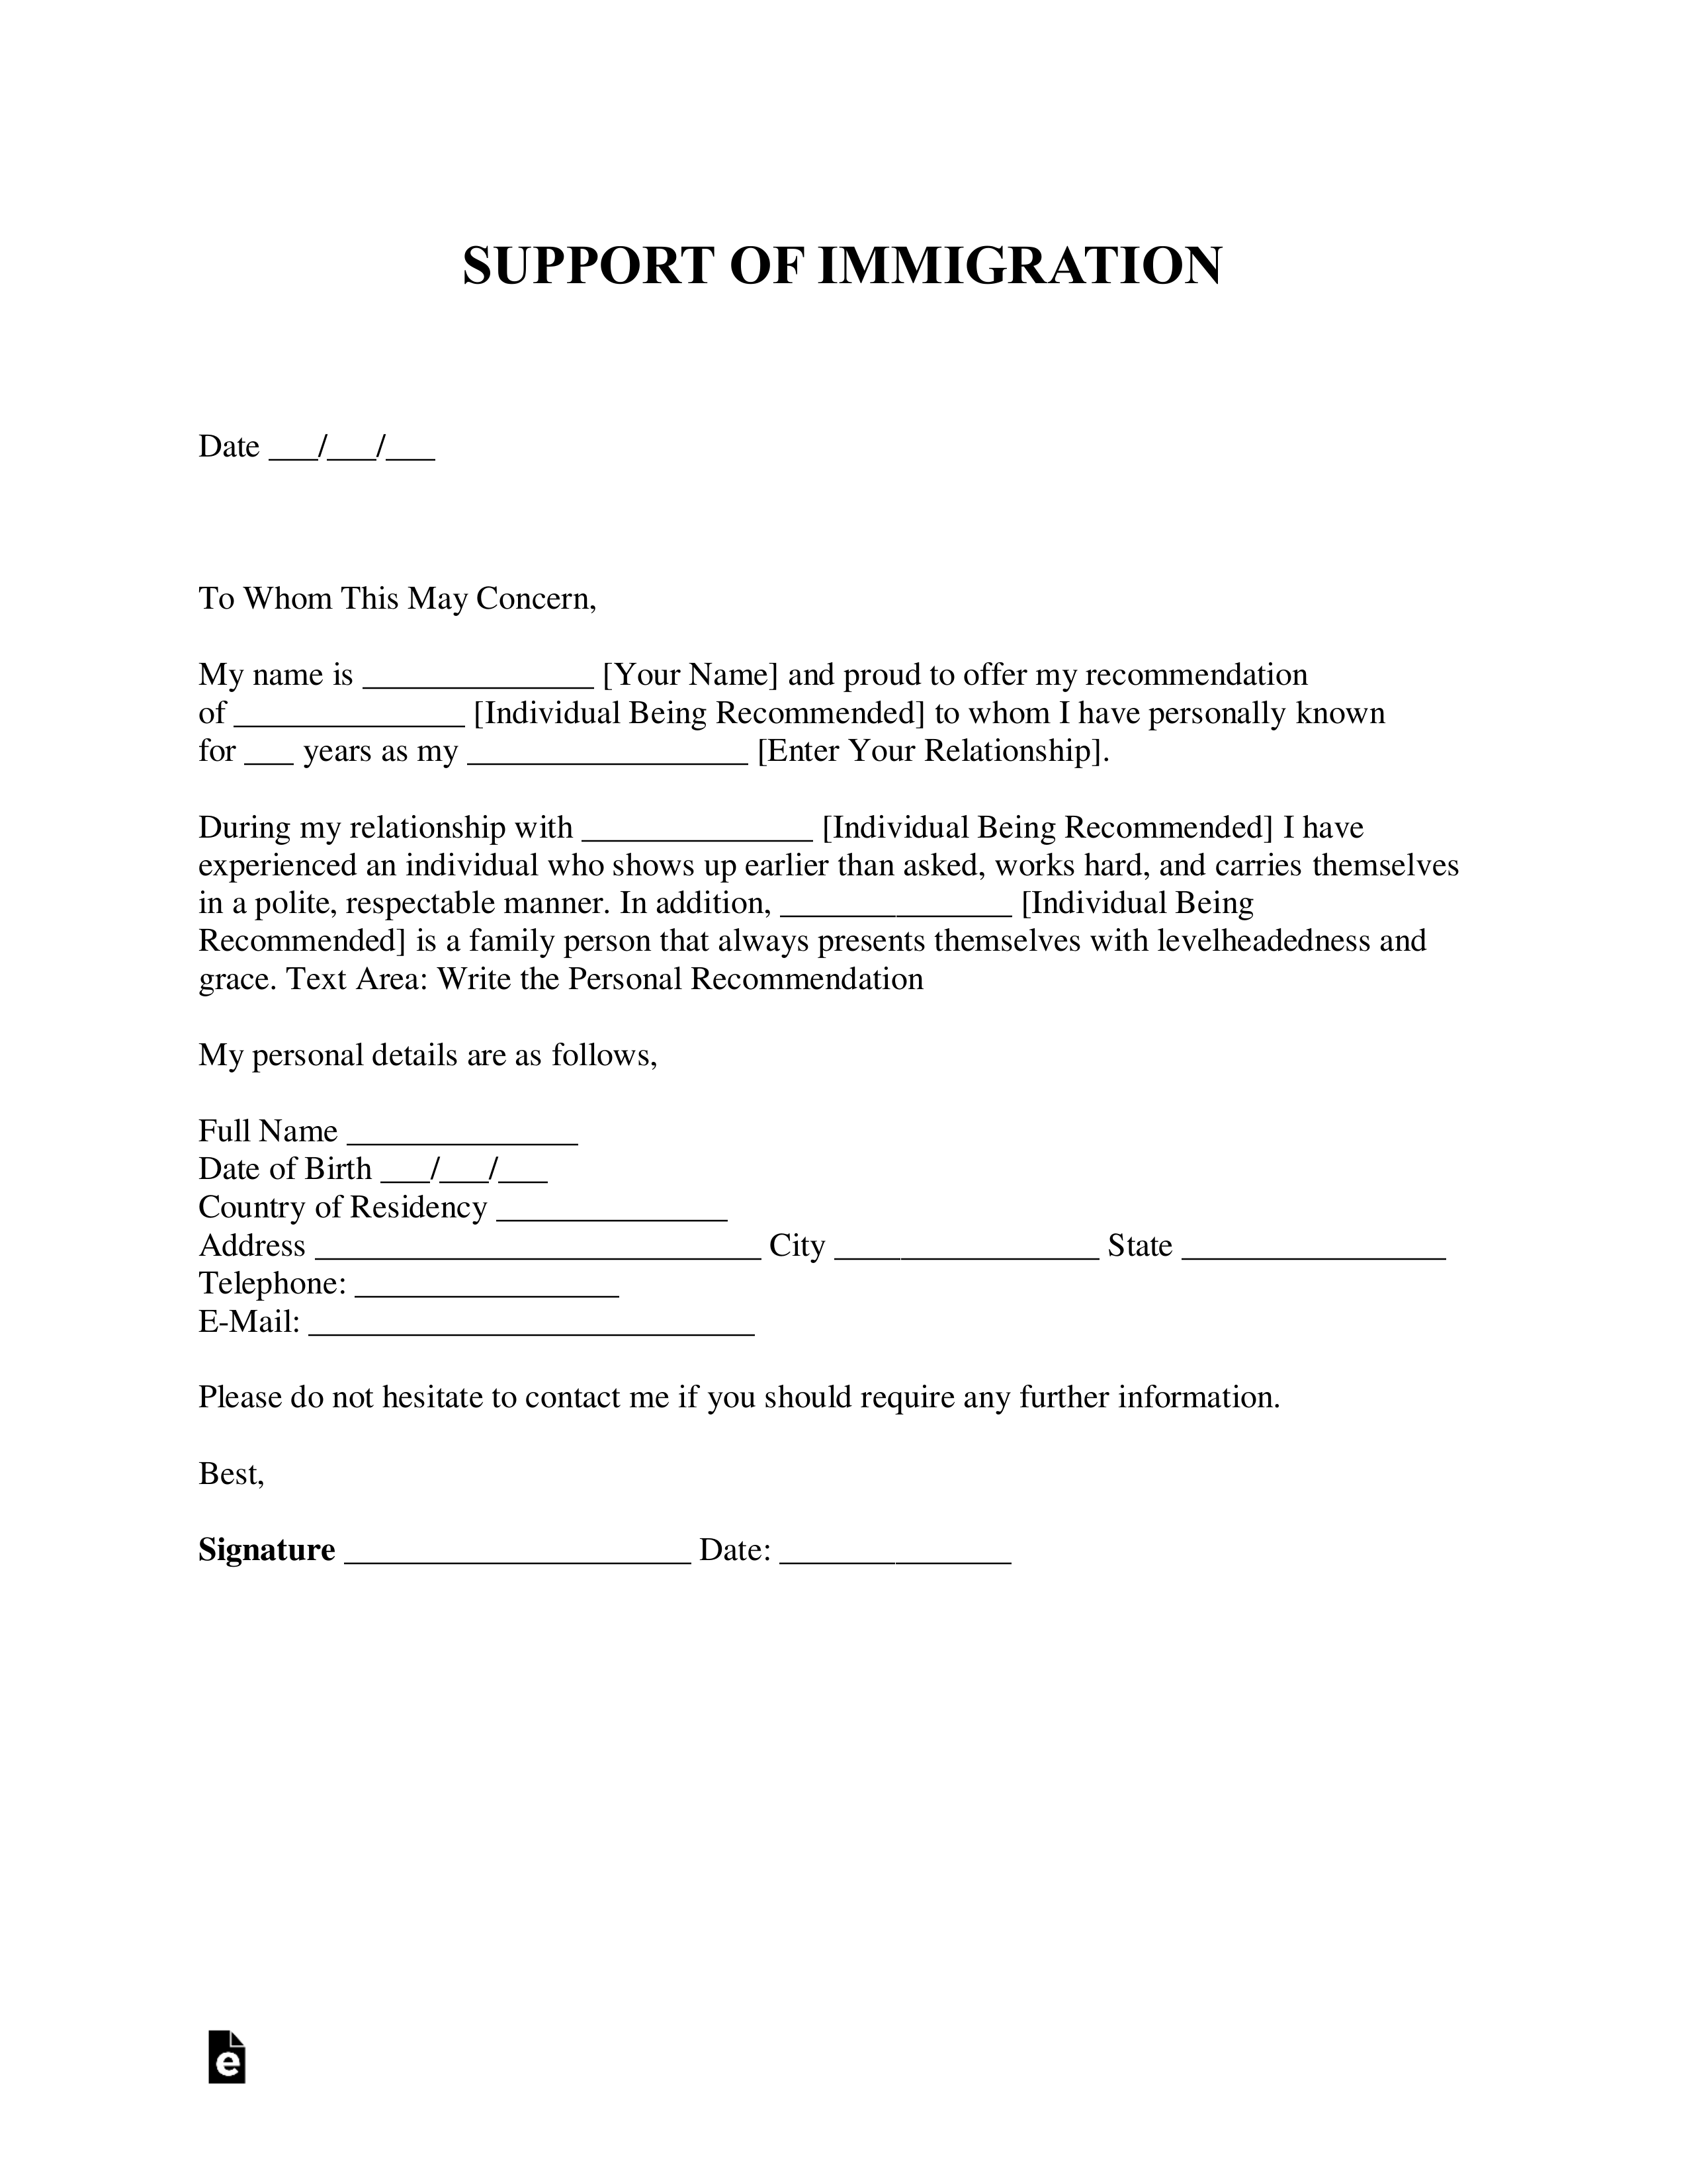 Immigration Recommendation Letter Format from eforms.com